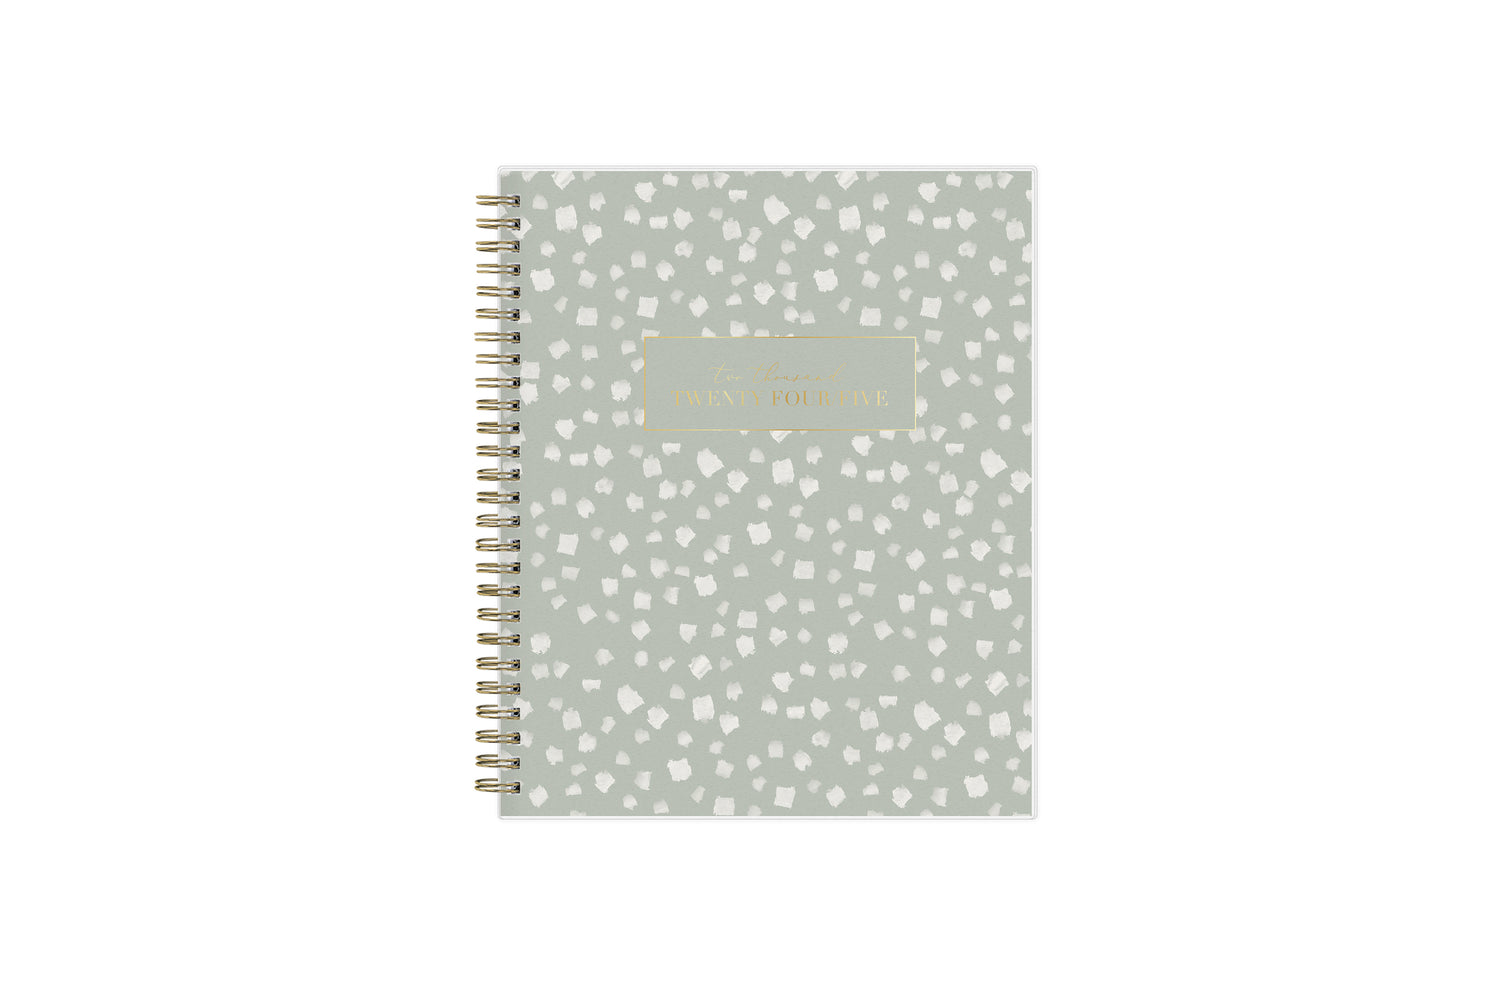 white blotches on soft neutral olive green back cover in 7x9 planner size weekly monthly planner